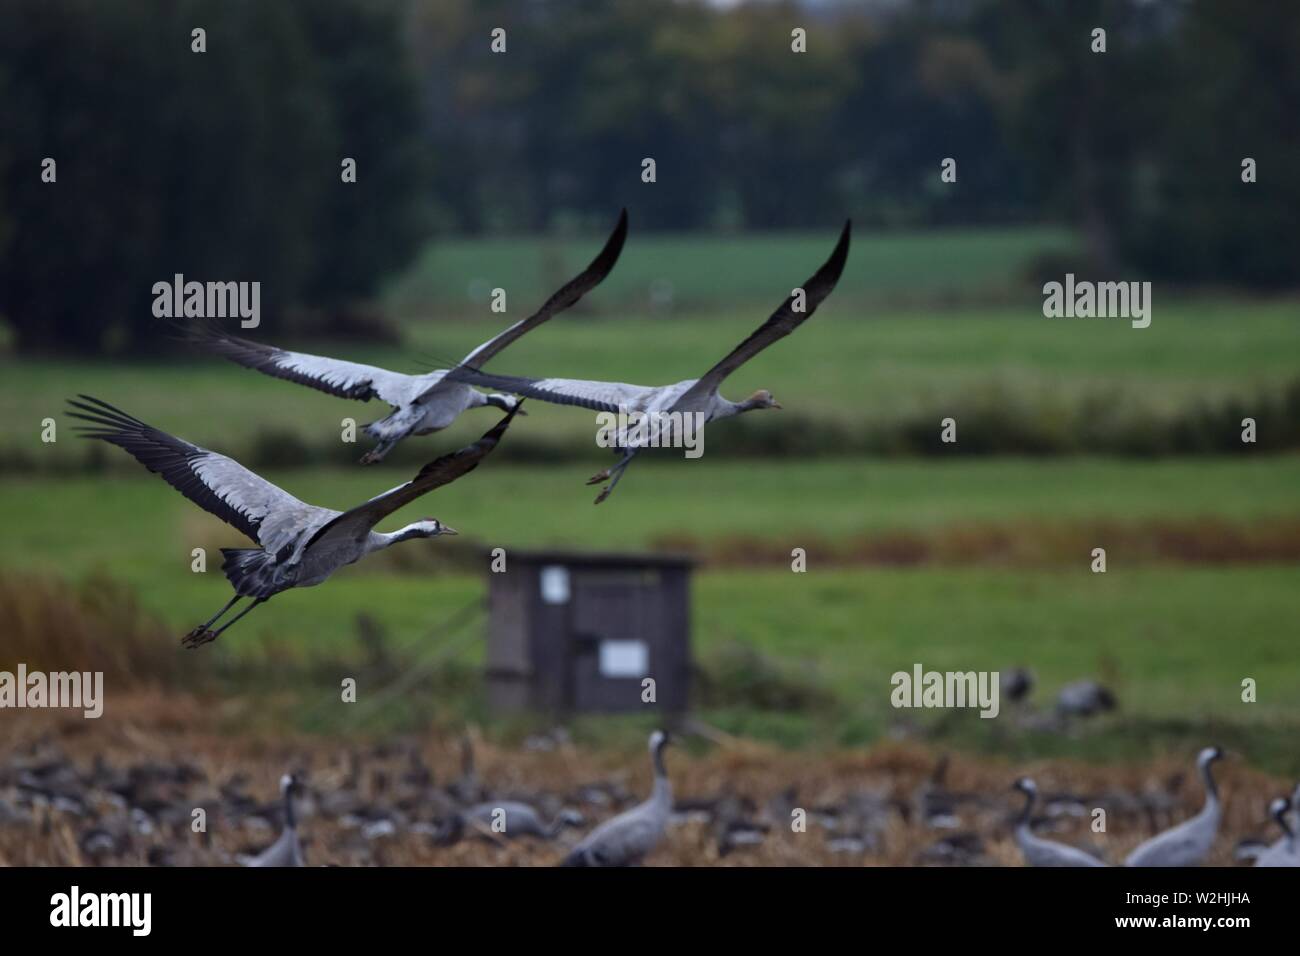 Cranes fly above a field Stock Photo